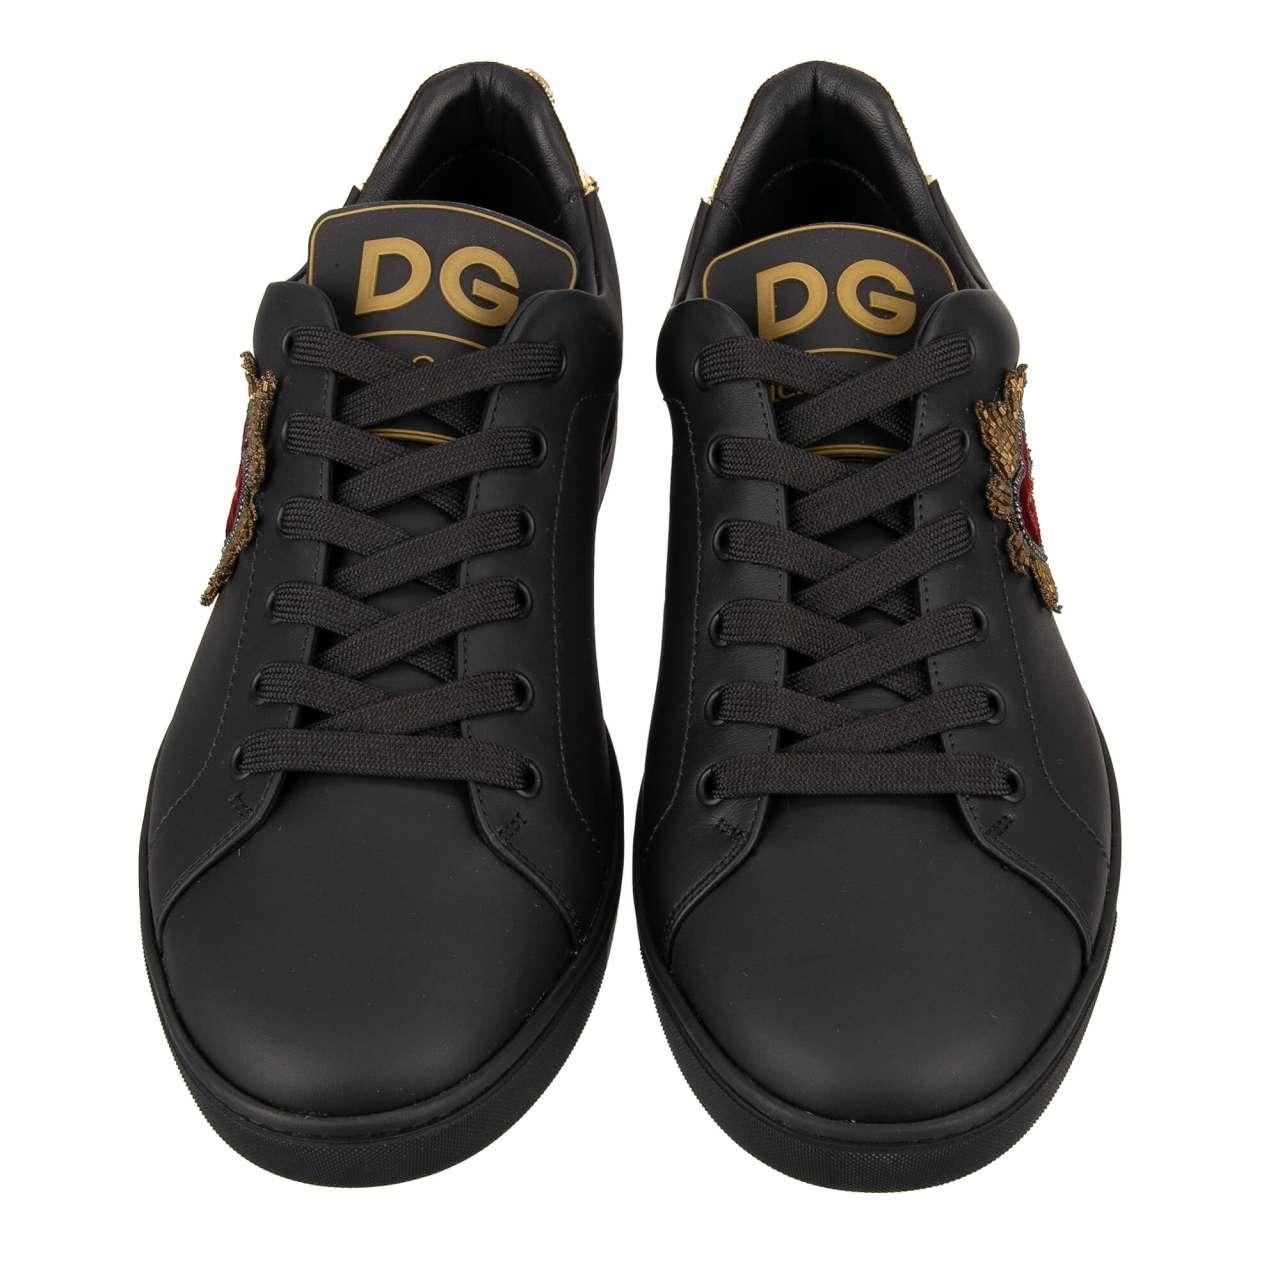 D&G - Low-Top Sneaker LONDON with Logo Heart Embroidery Black Gold EUR 43.5 In Excellent Condition For Sale In Erkrath, DE